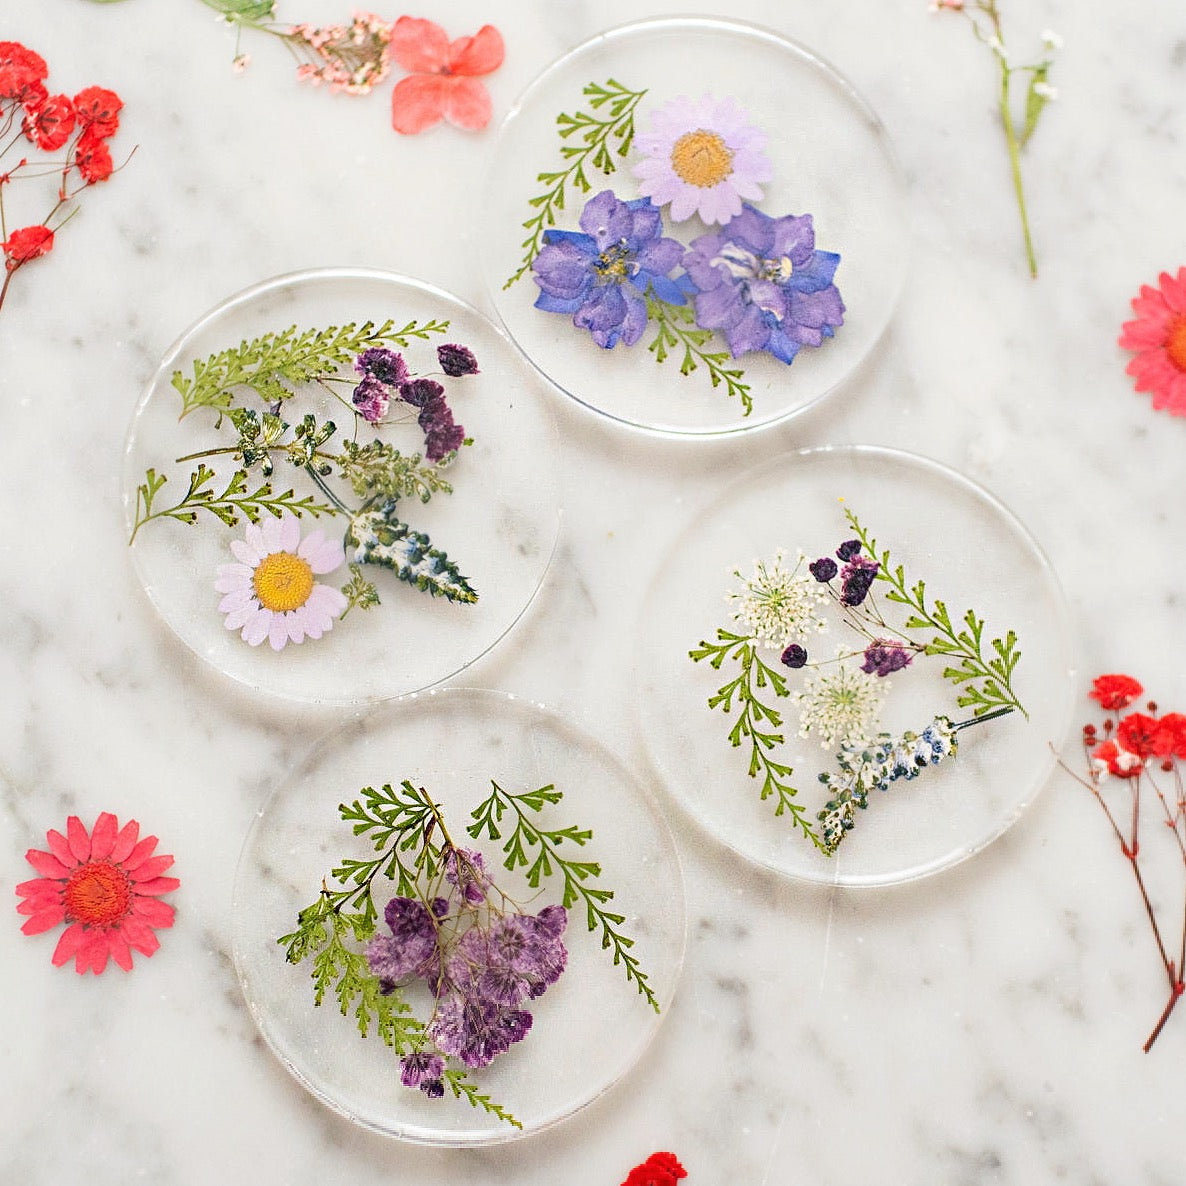 Flower Resin Coaster Class - pressed flowers- Saturday 3/02 at 1pm